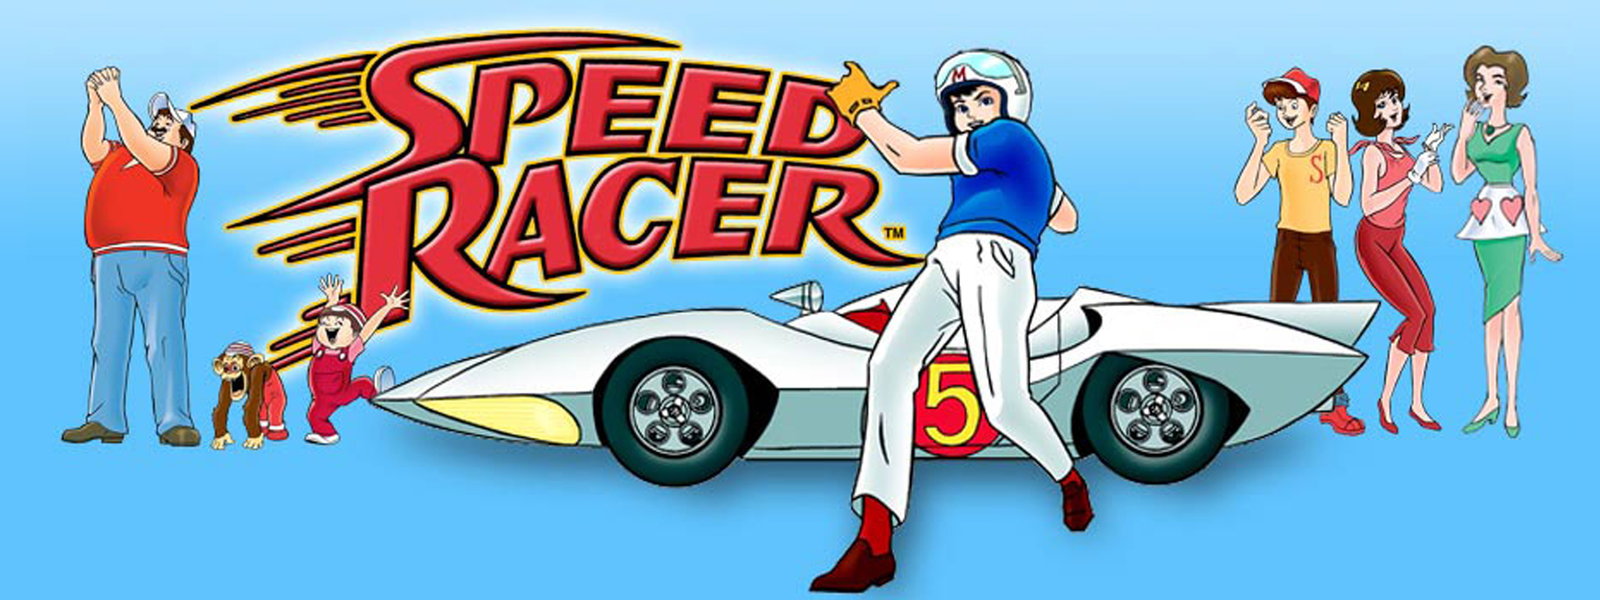 Nice wallpapers Speed Racer 1600x600px